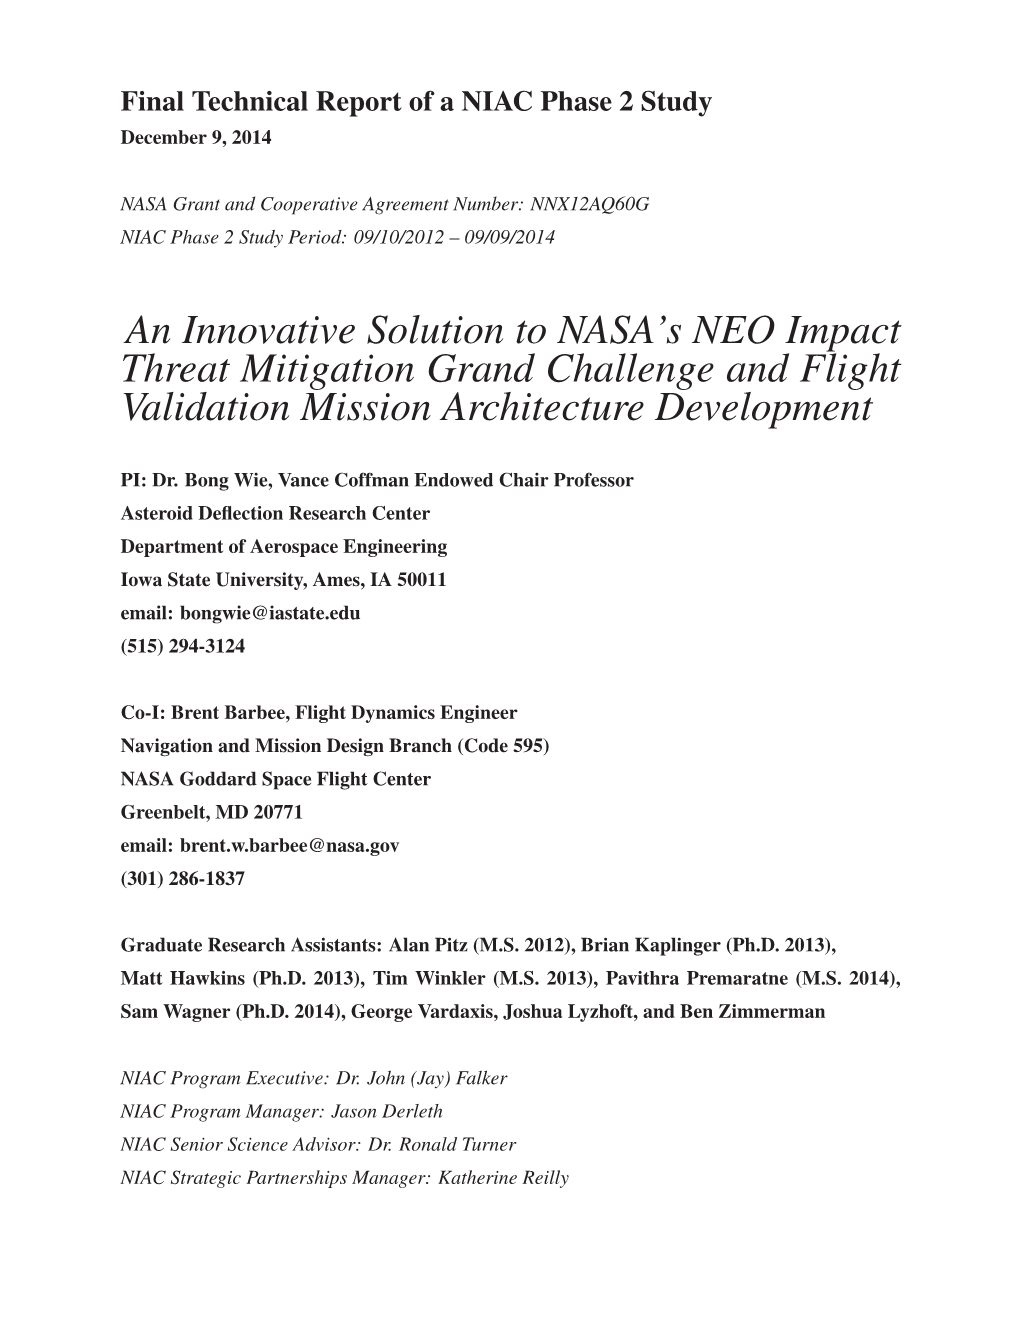 An Innovative Solution to NASA's NEO Impact Threat Mitigation Grand Challenge and Flight Validation Mission Architecture Devel